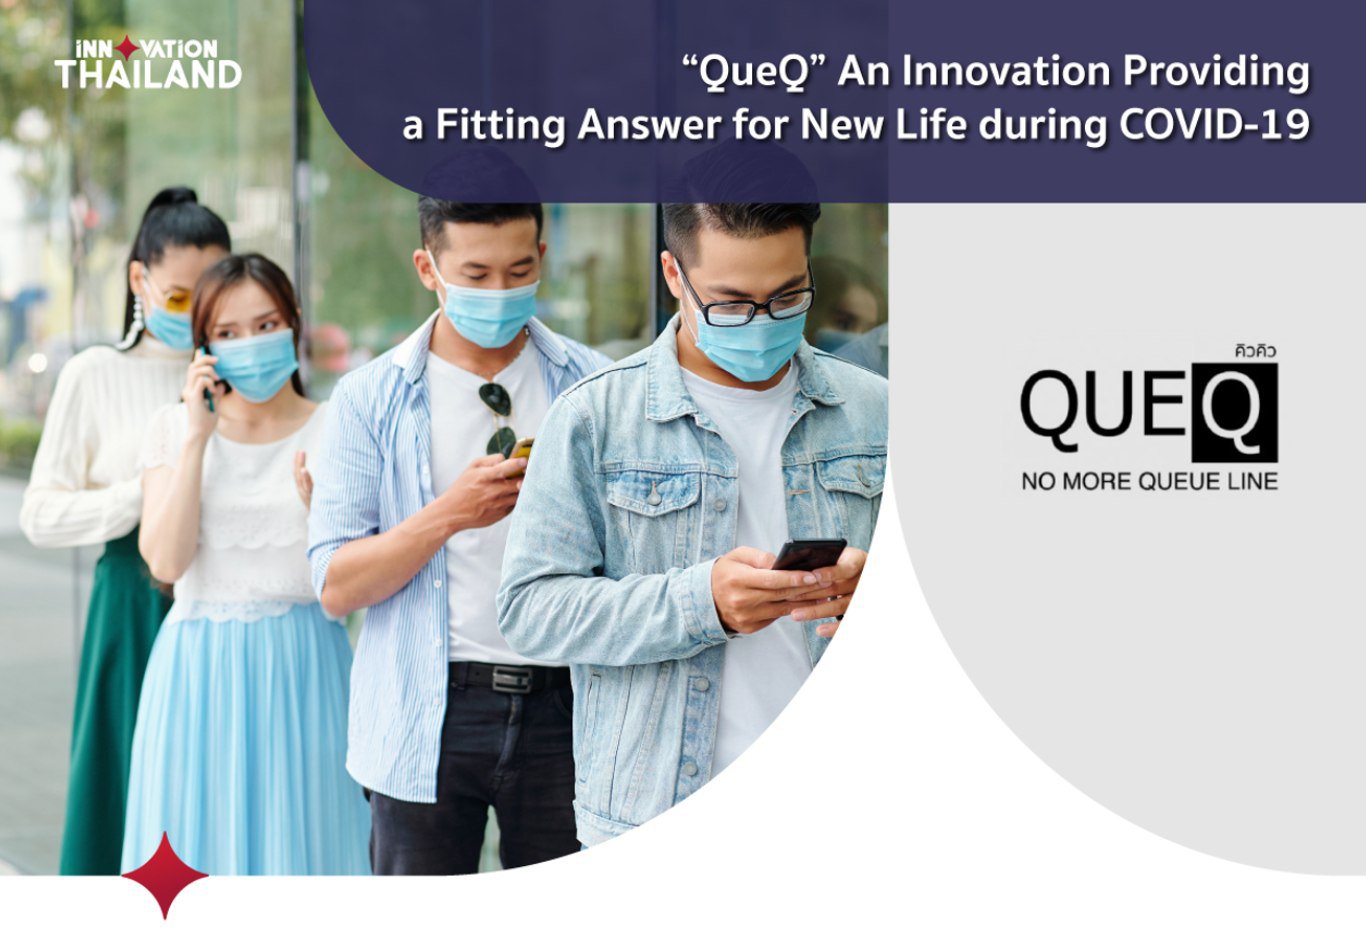 QueQ An Innovation Providing a Fitting Answer for Life during COVID-19 to Provide Equal Access to All